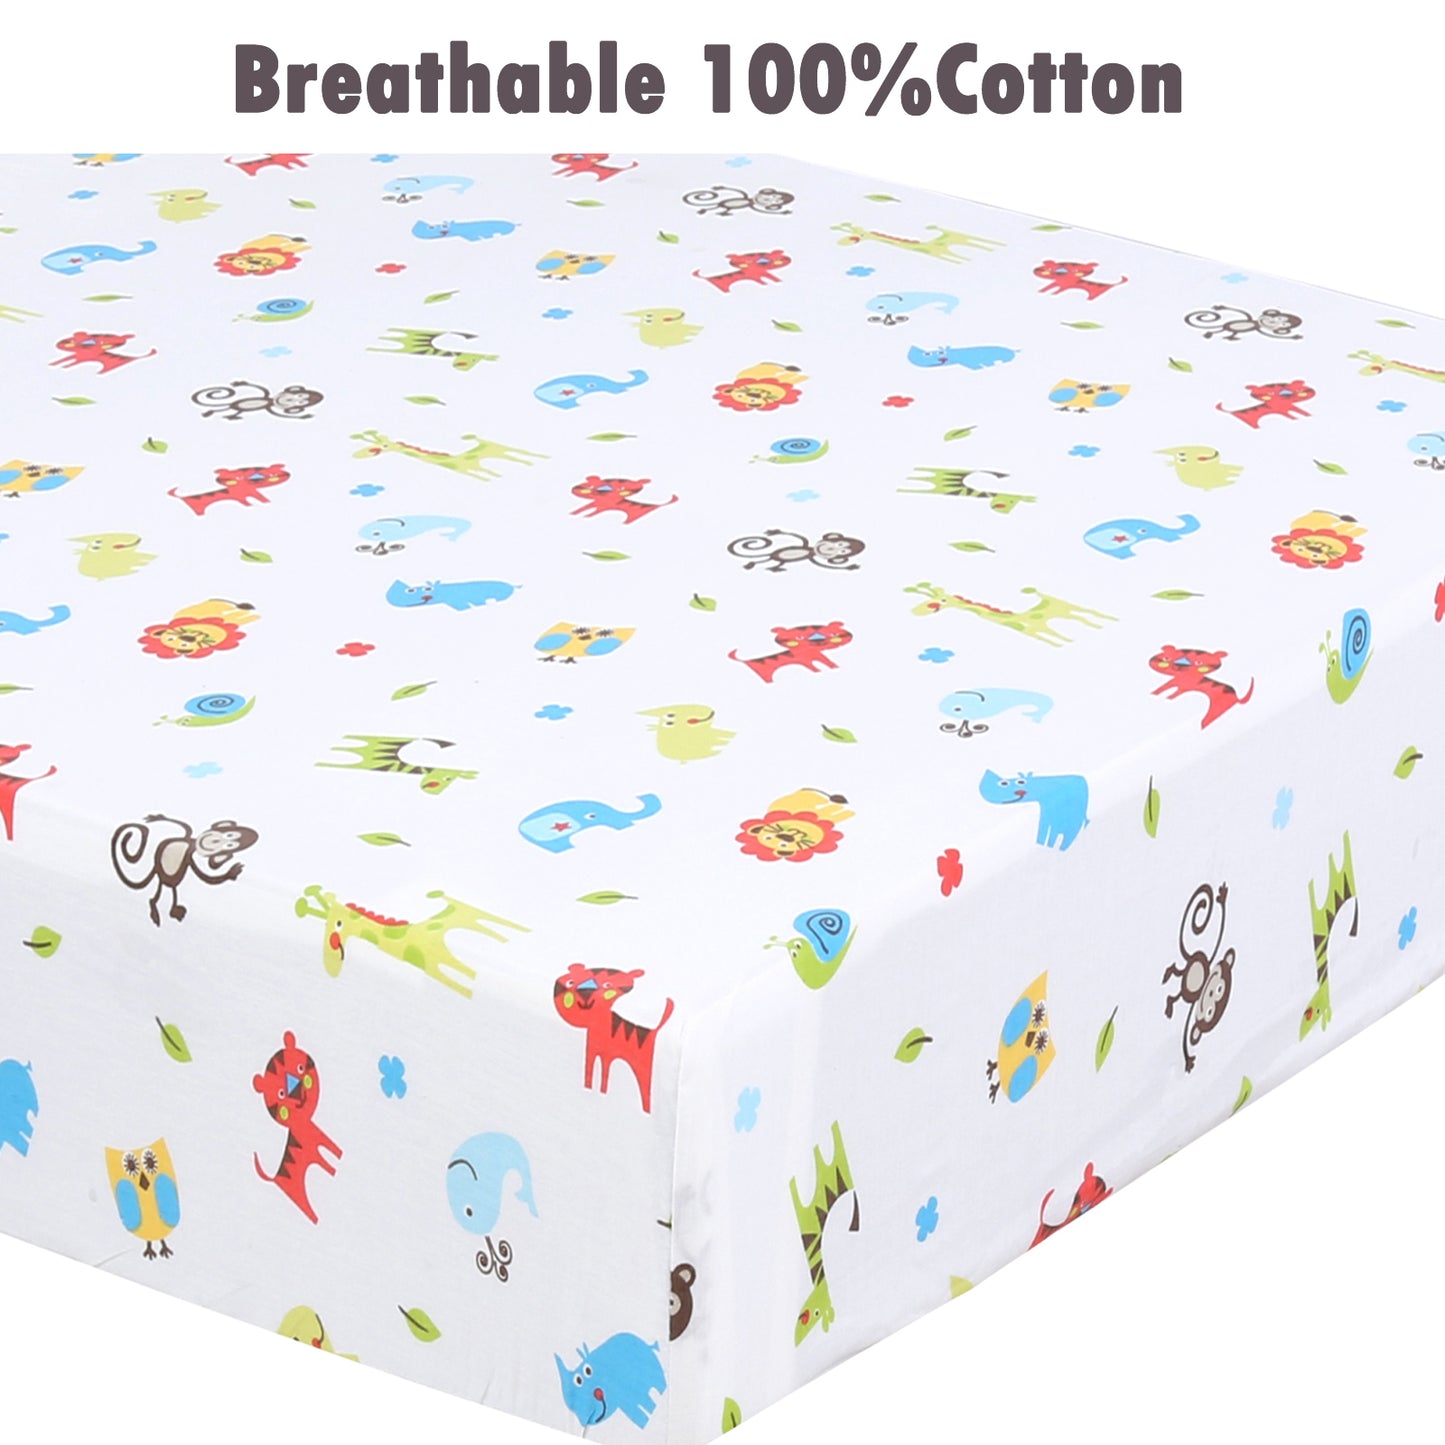 3 Piece Crib/Toddler Cotton Fitted Sheets Pink Colorful Owls Birds Zoo Animals Heart